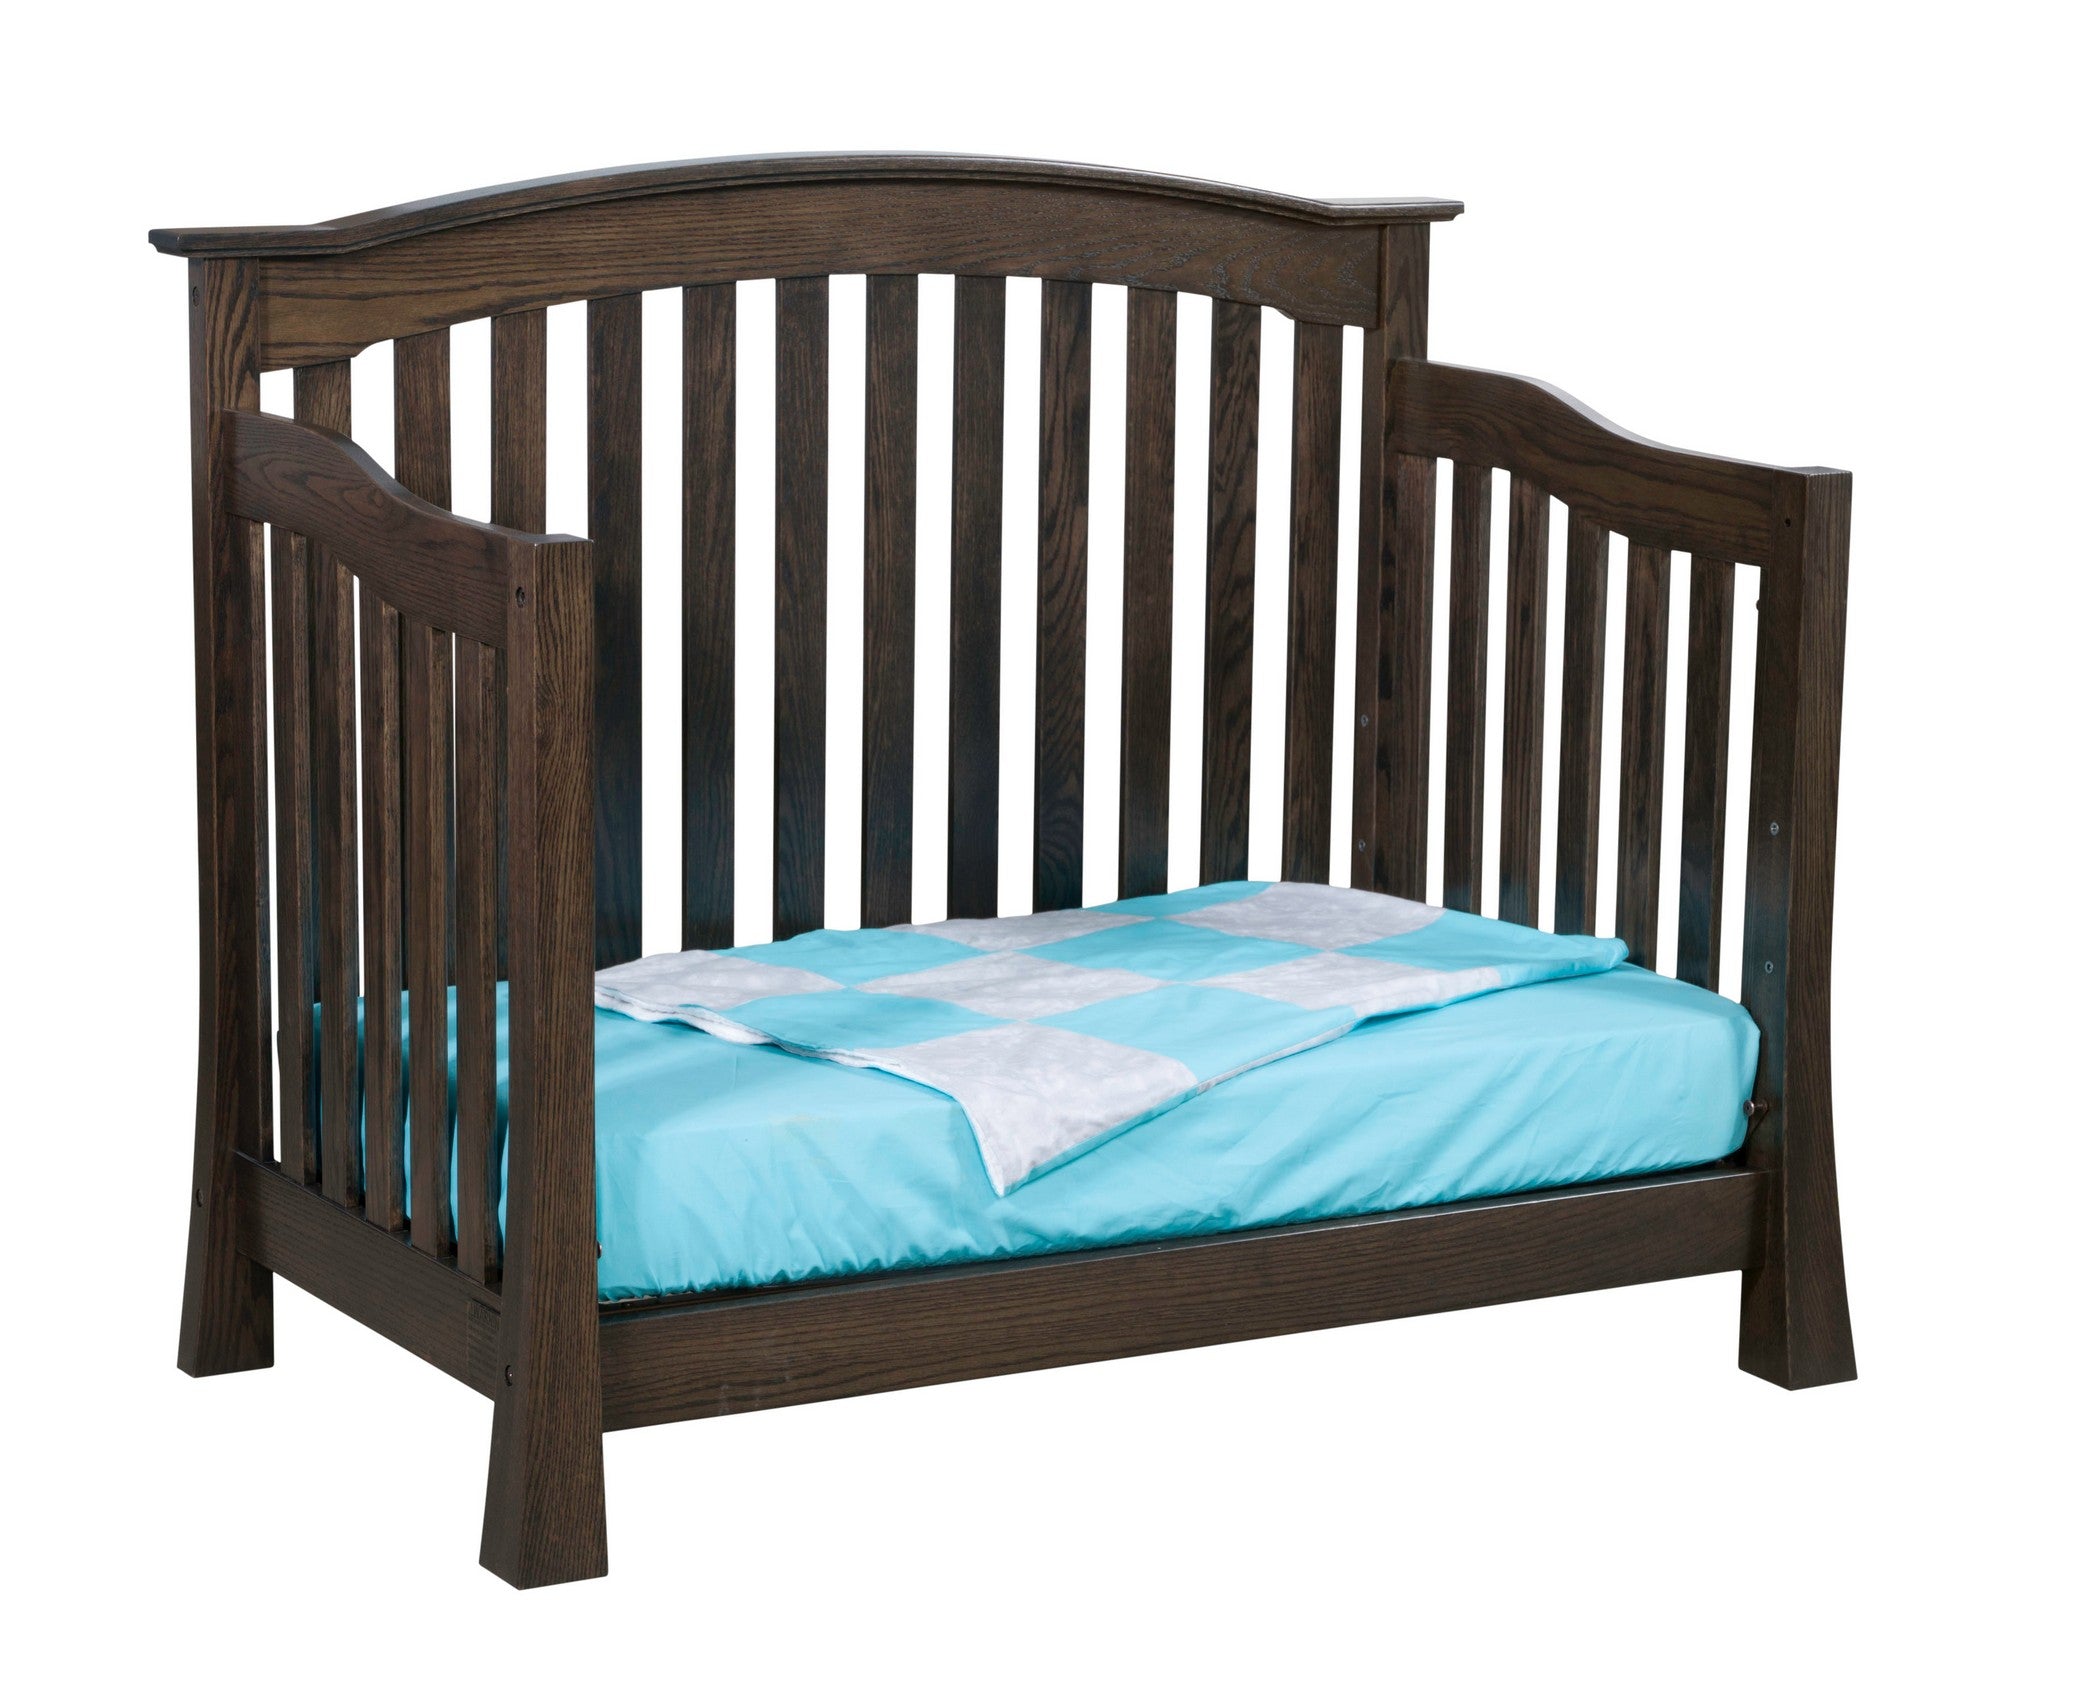 addison toddler bed in oak wood with dark knight stain